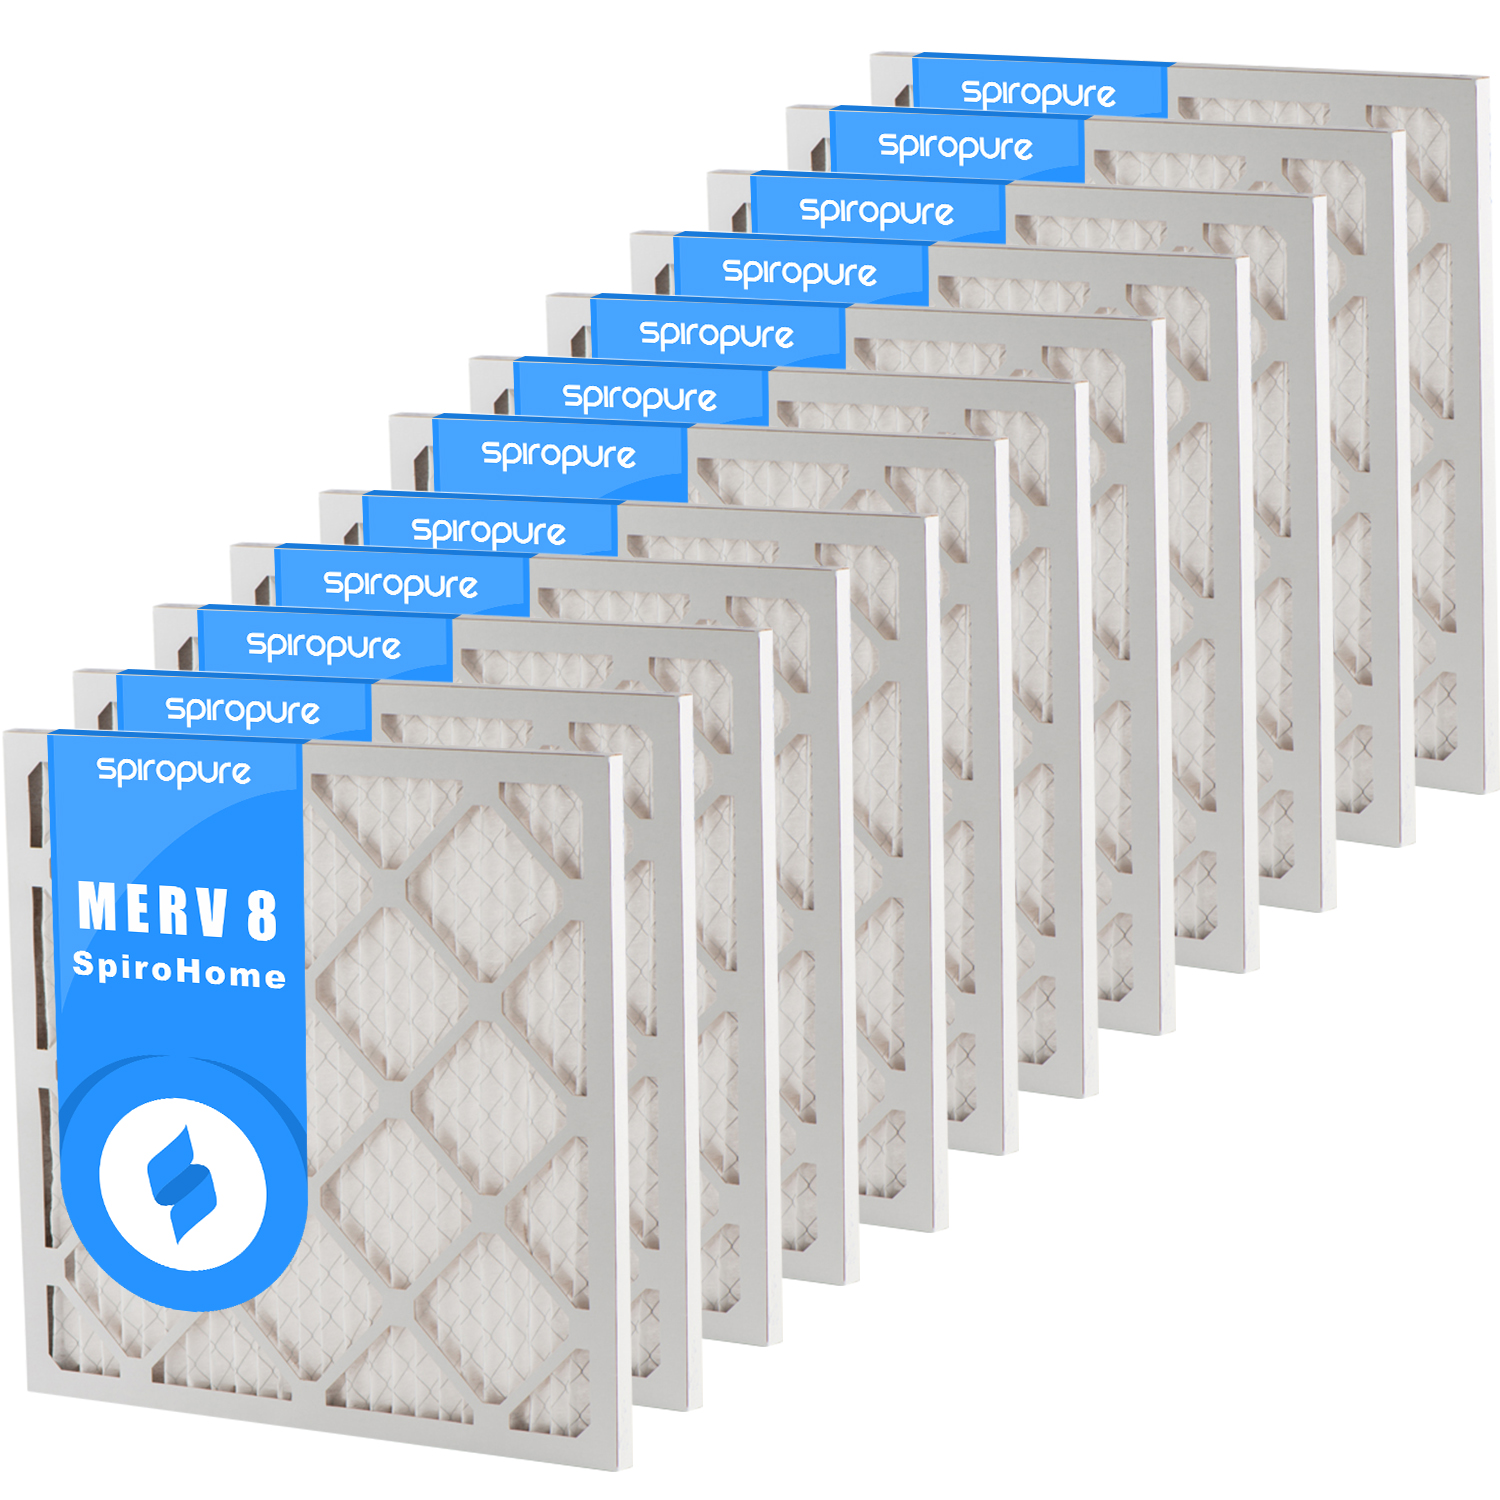 AIRx Filters Dust 16x16x1 Air Filter Replacement MERV 8 AC Furnace Pleated Filter 12-Pack